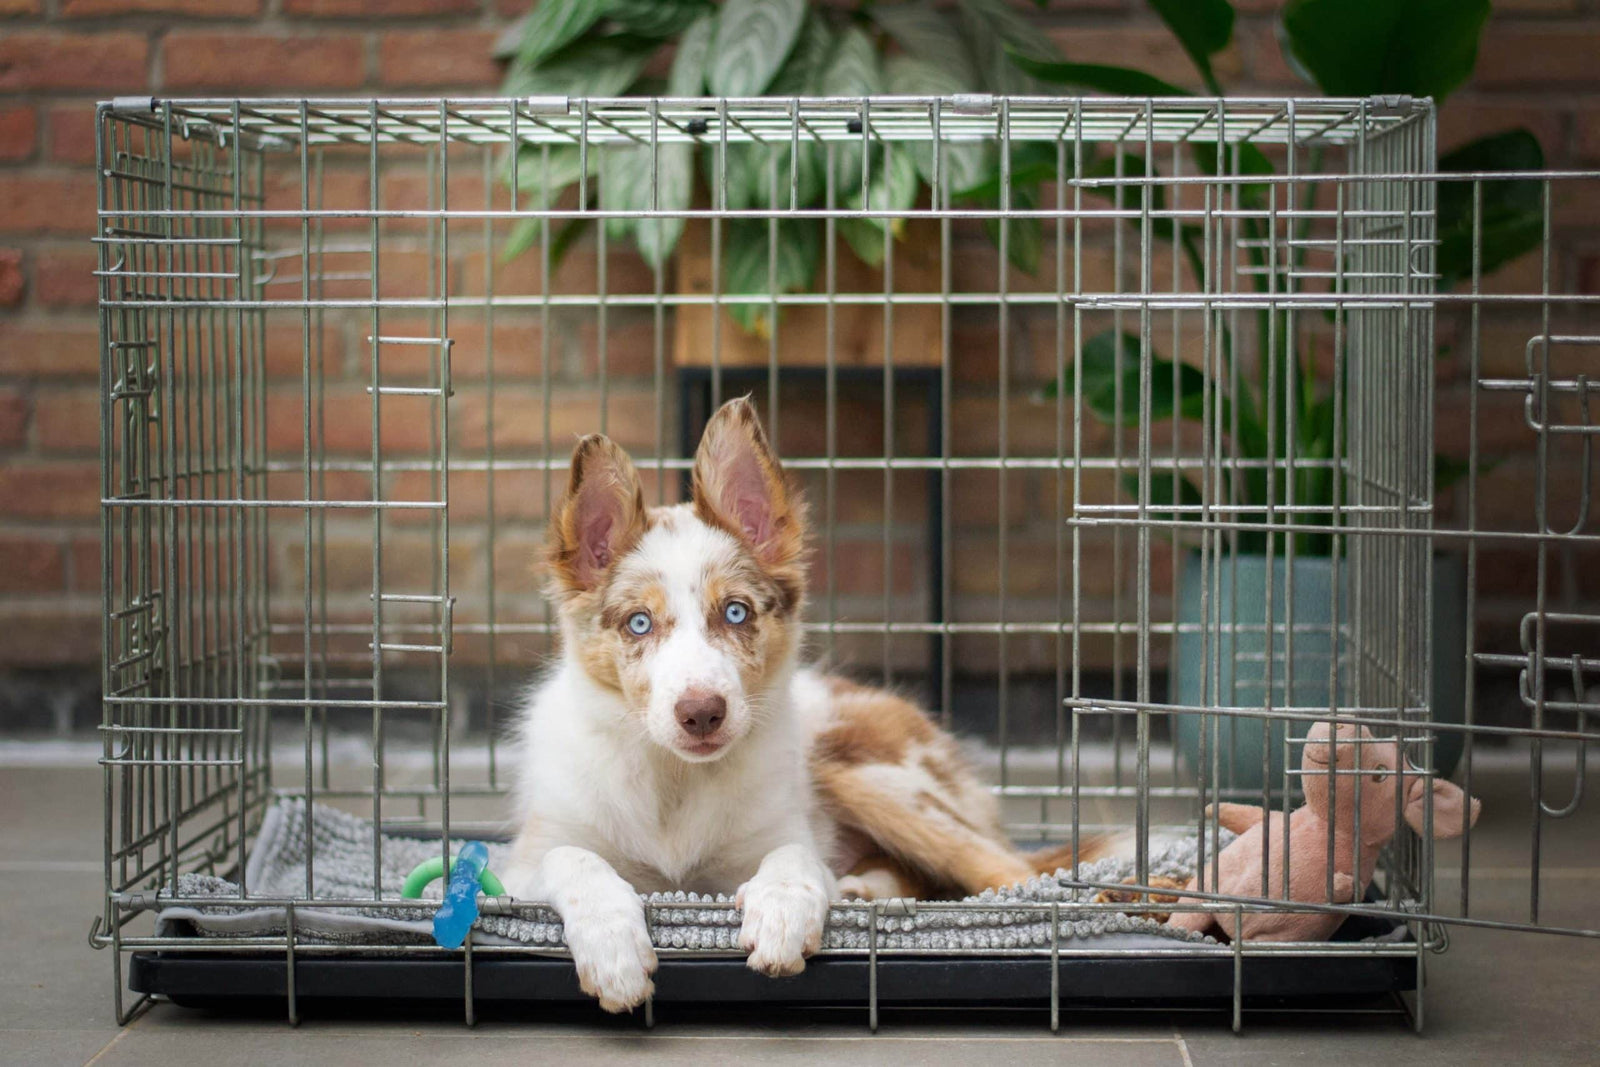 Crate Training a Dog